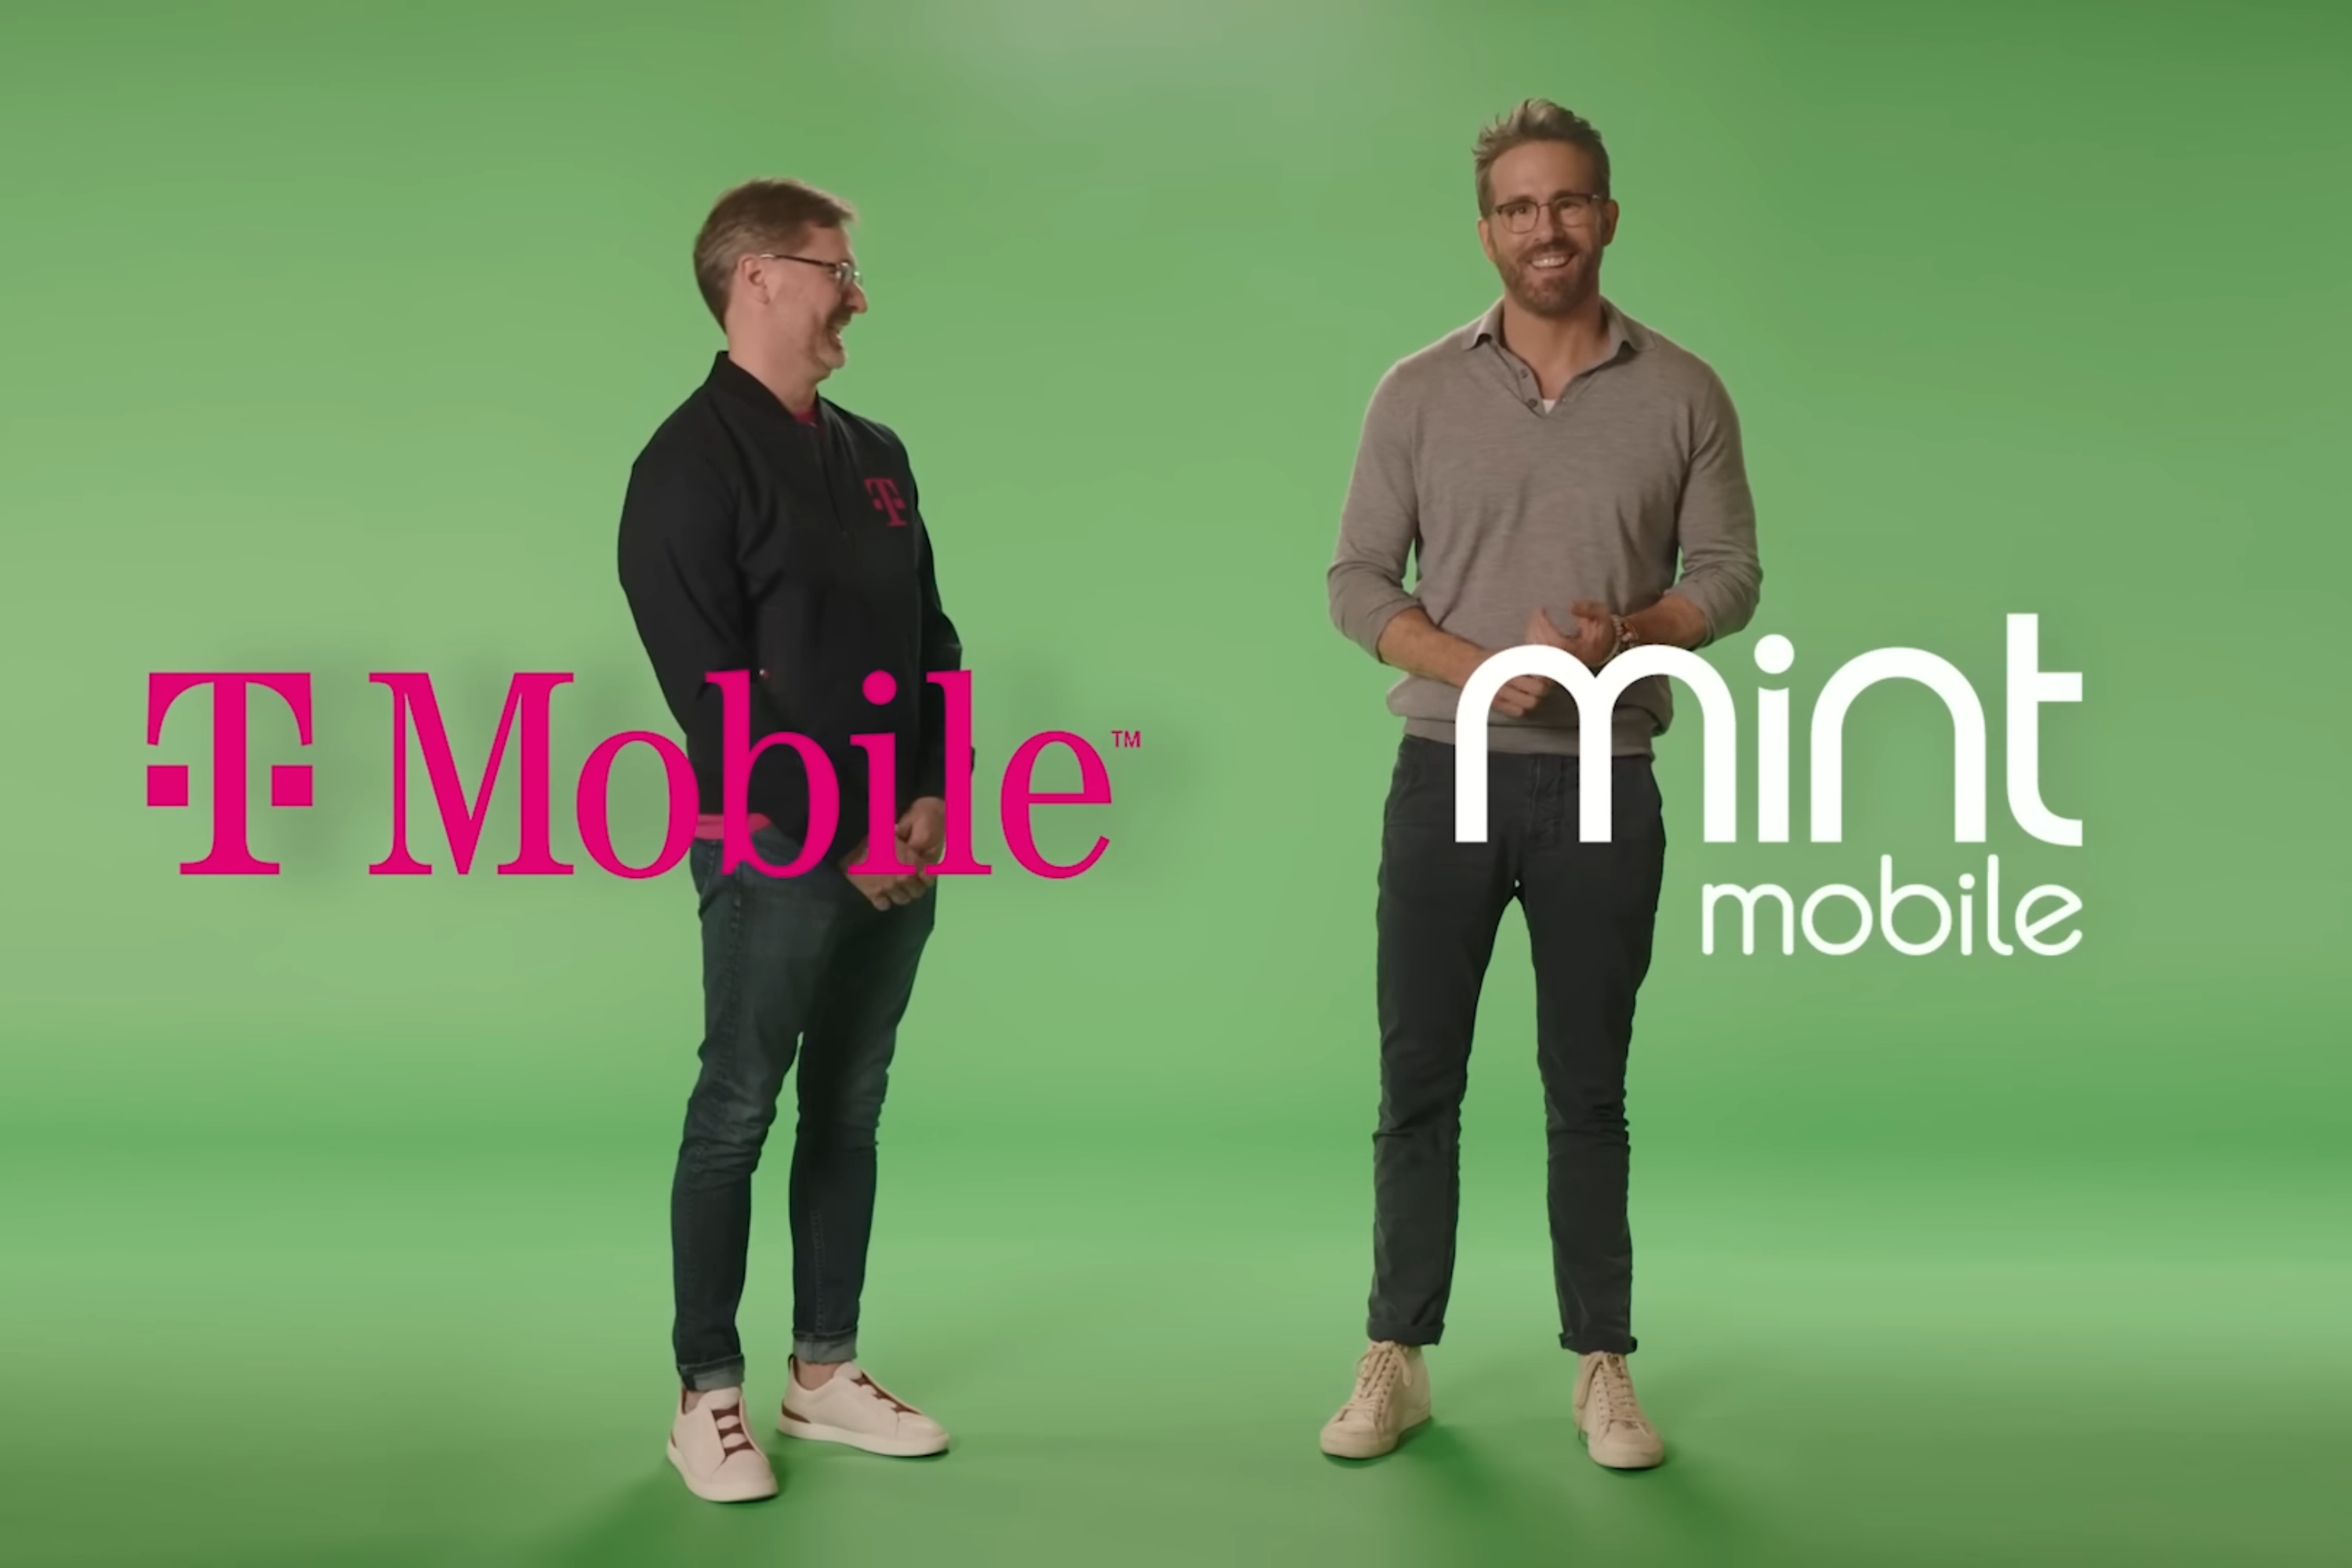 Ryan Reynolds and T-Mobile CEO Mike Sievert standing in front of green screen